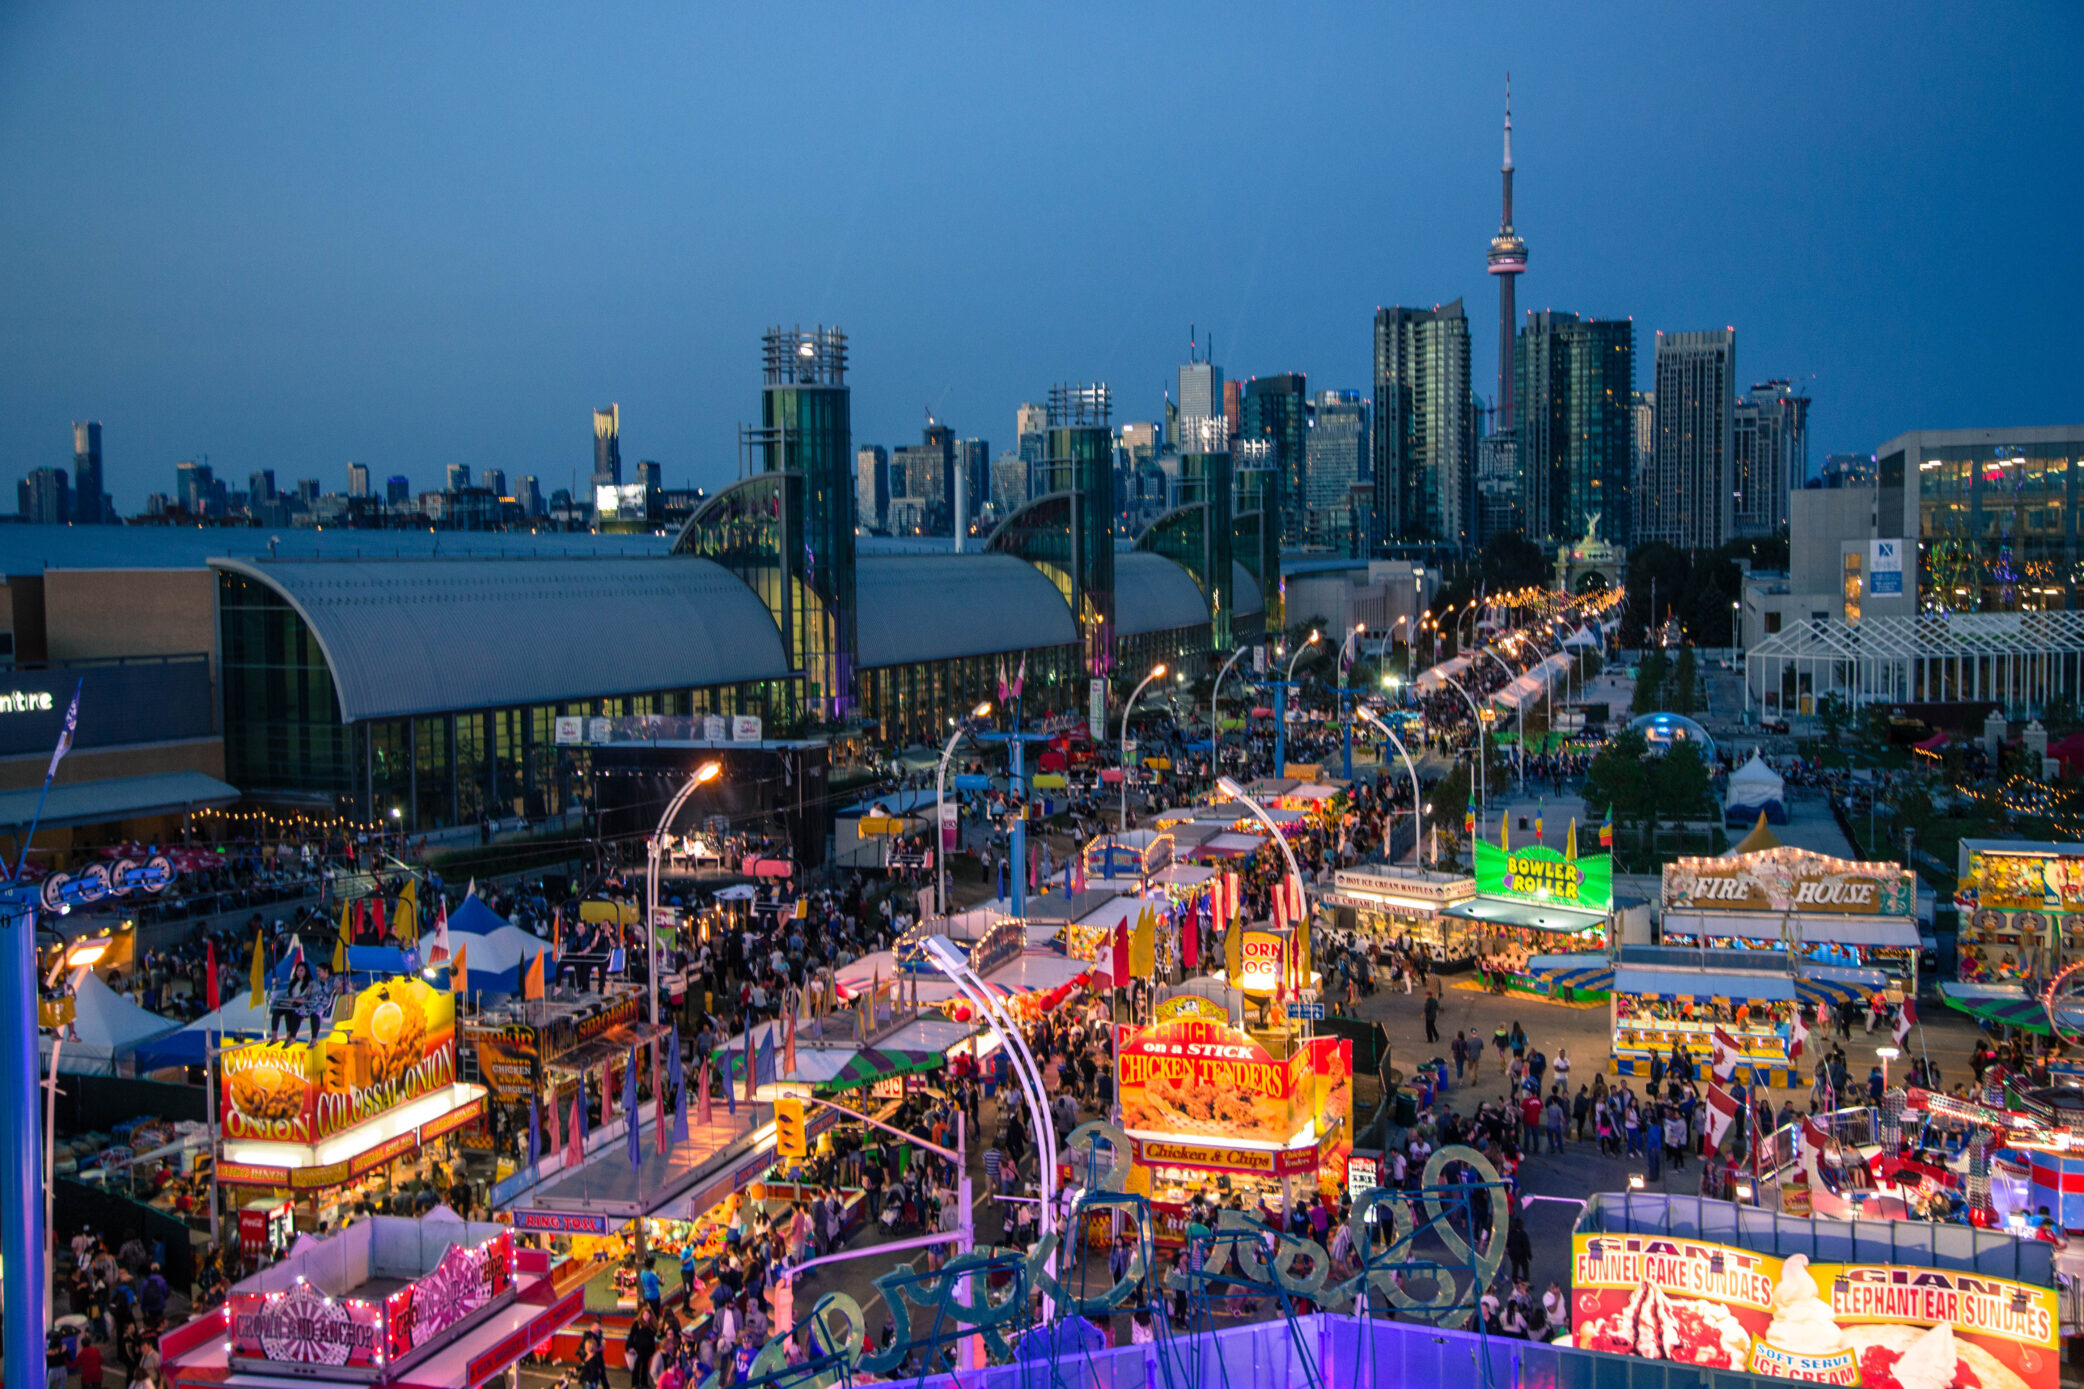 Aerial view of the CNE Midway at dusk. Image includes the Enercare Centre, the CN Tower and part of Hotel X.